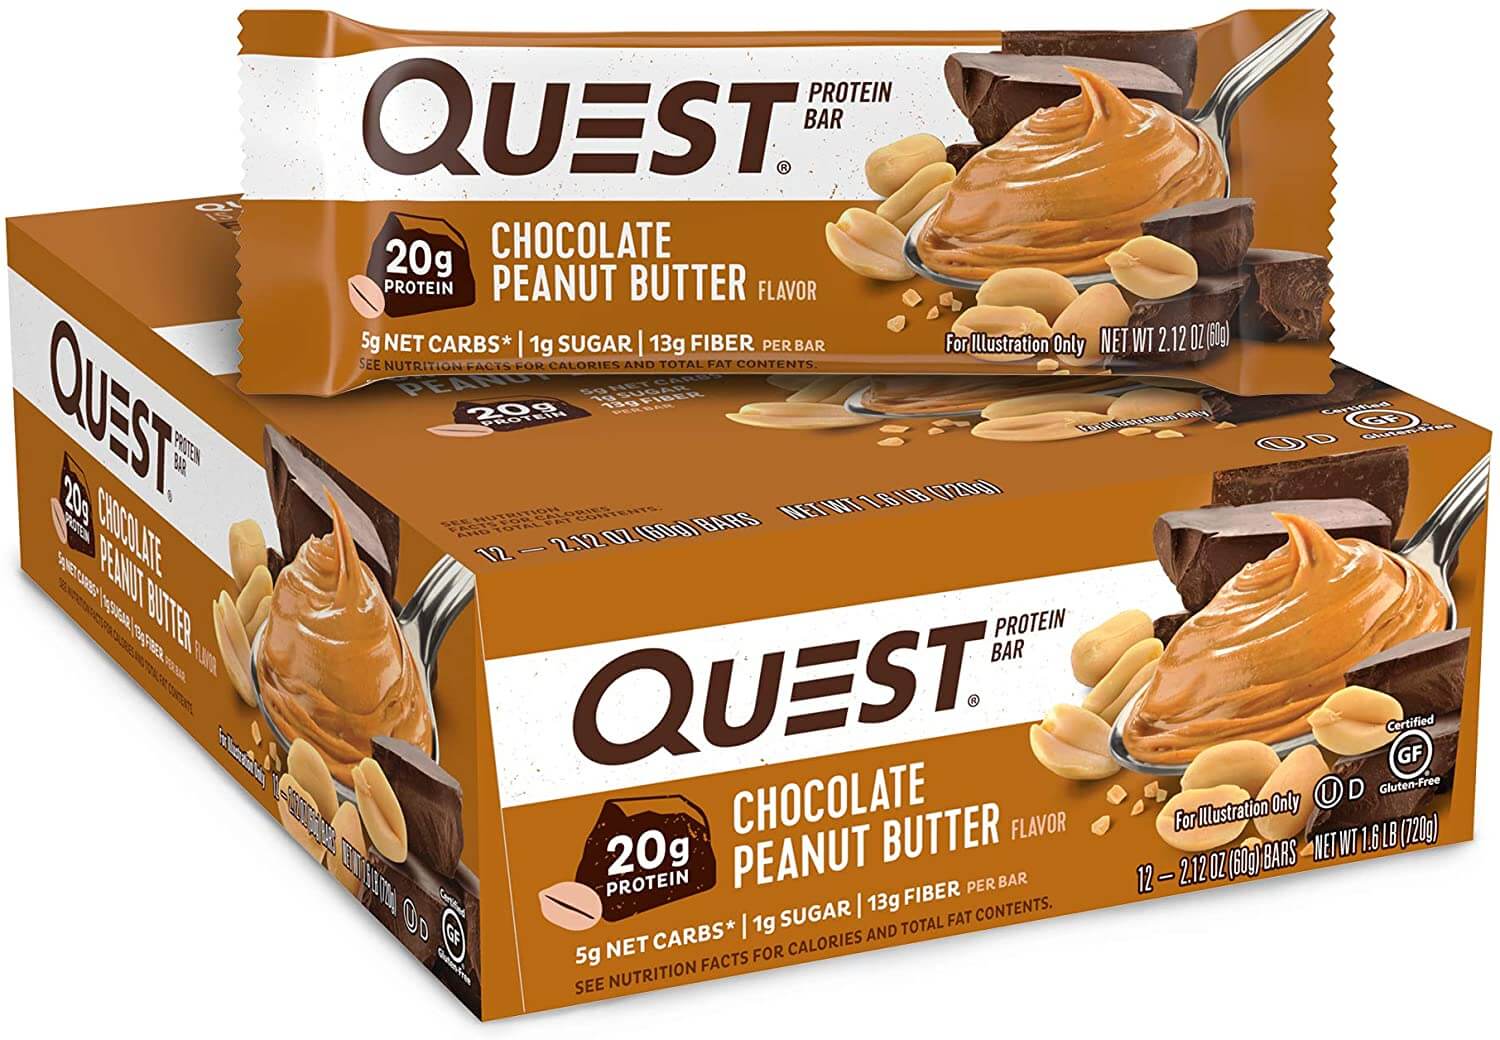 Best 7 Tasting Quest Protein Bar Flavors Ranked - Shredded Zeus